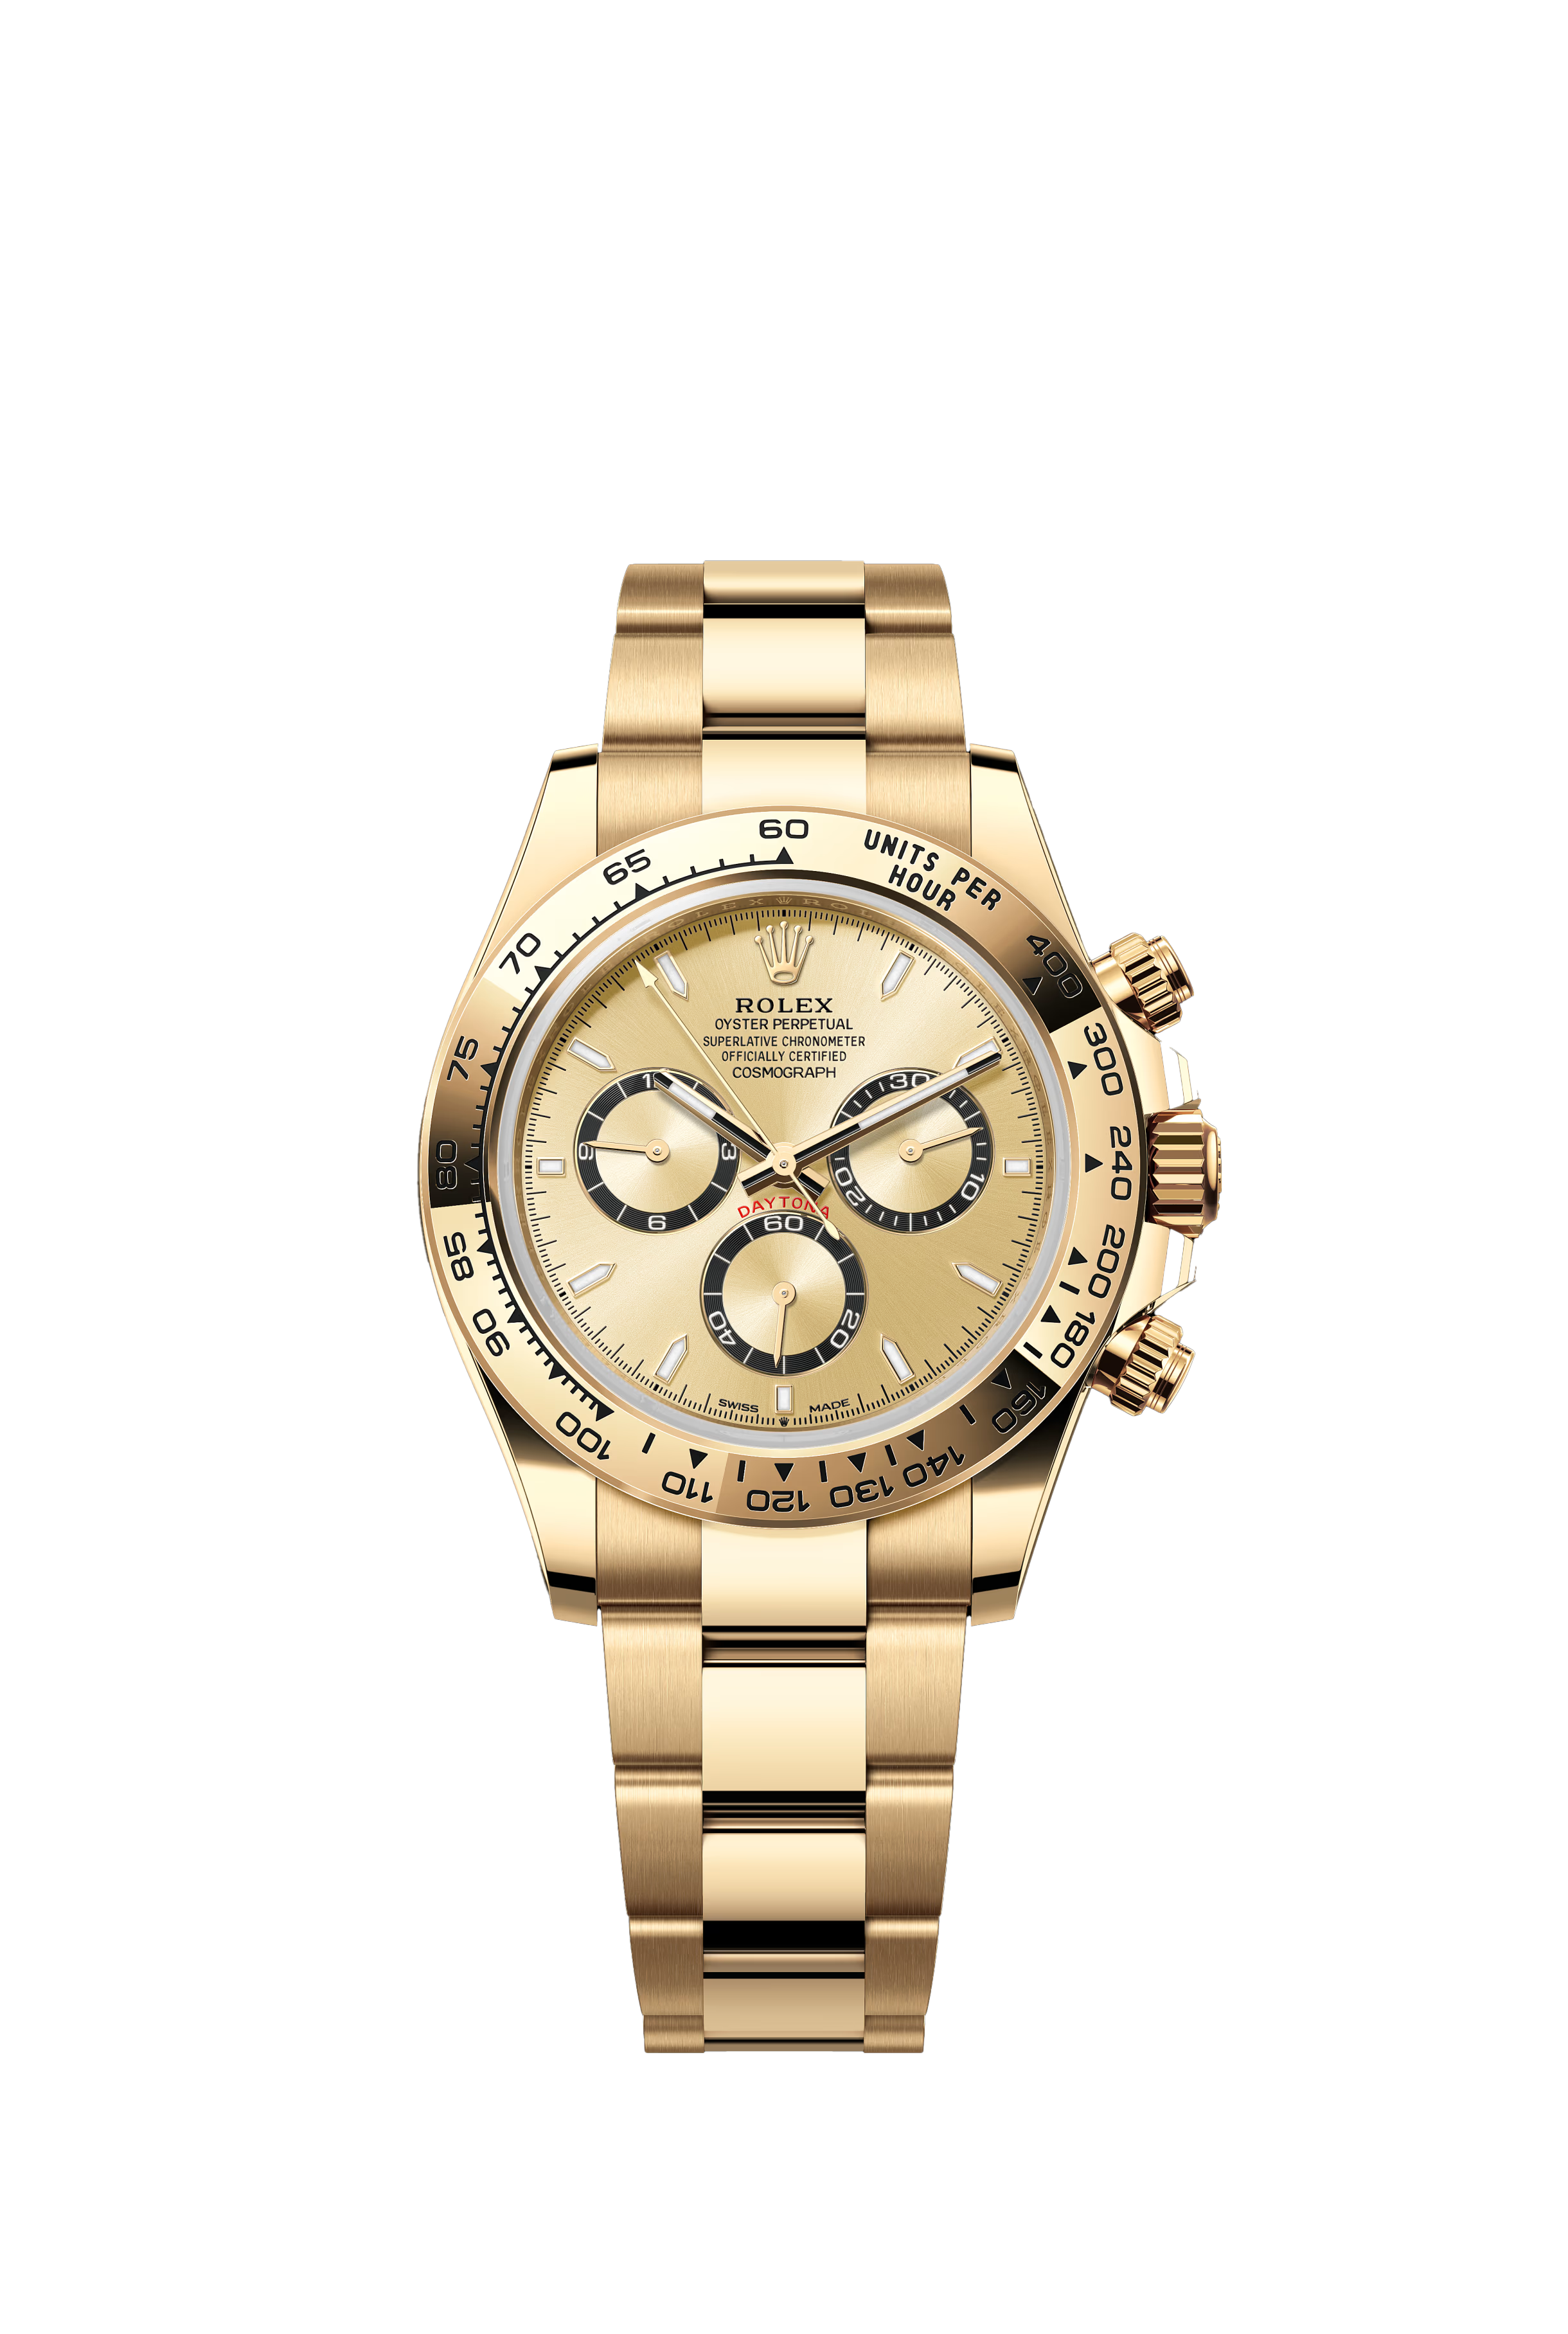 Rolex Cosmograph Daytona Oyster, 40 mm, yellow gold Reference 126508